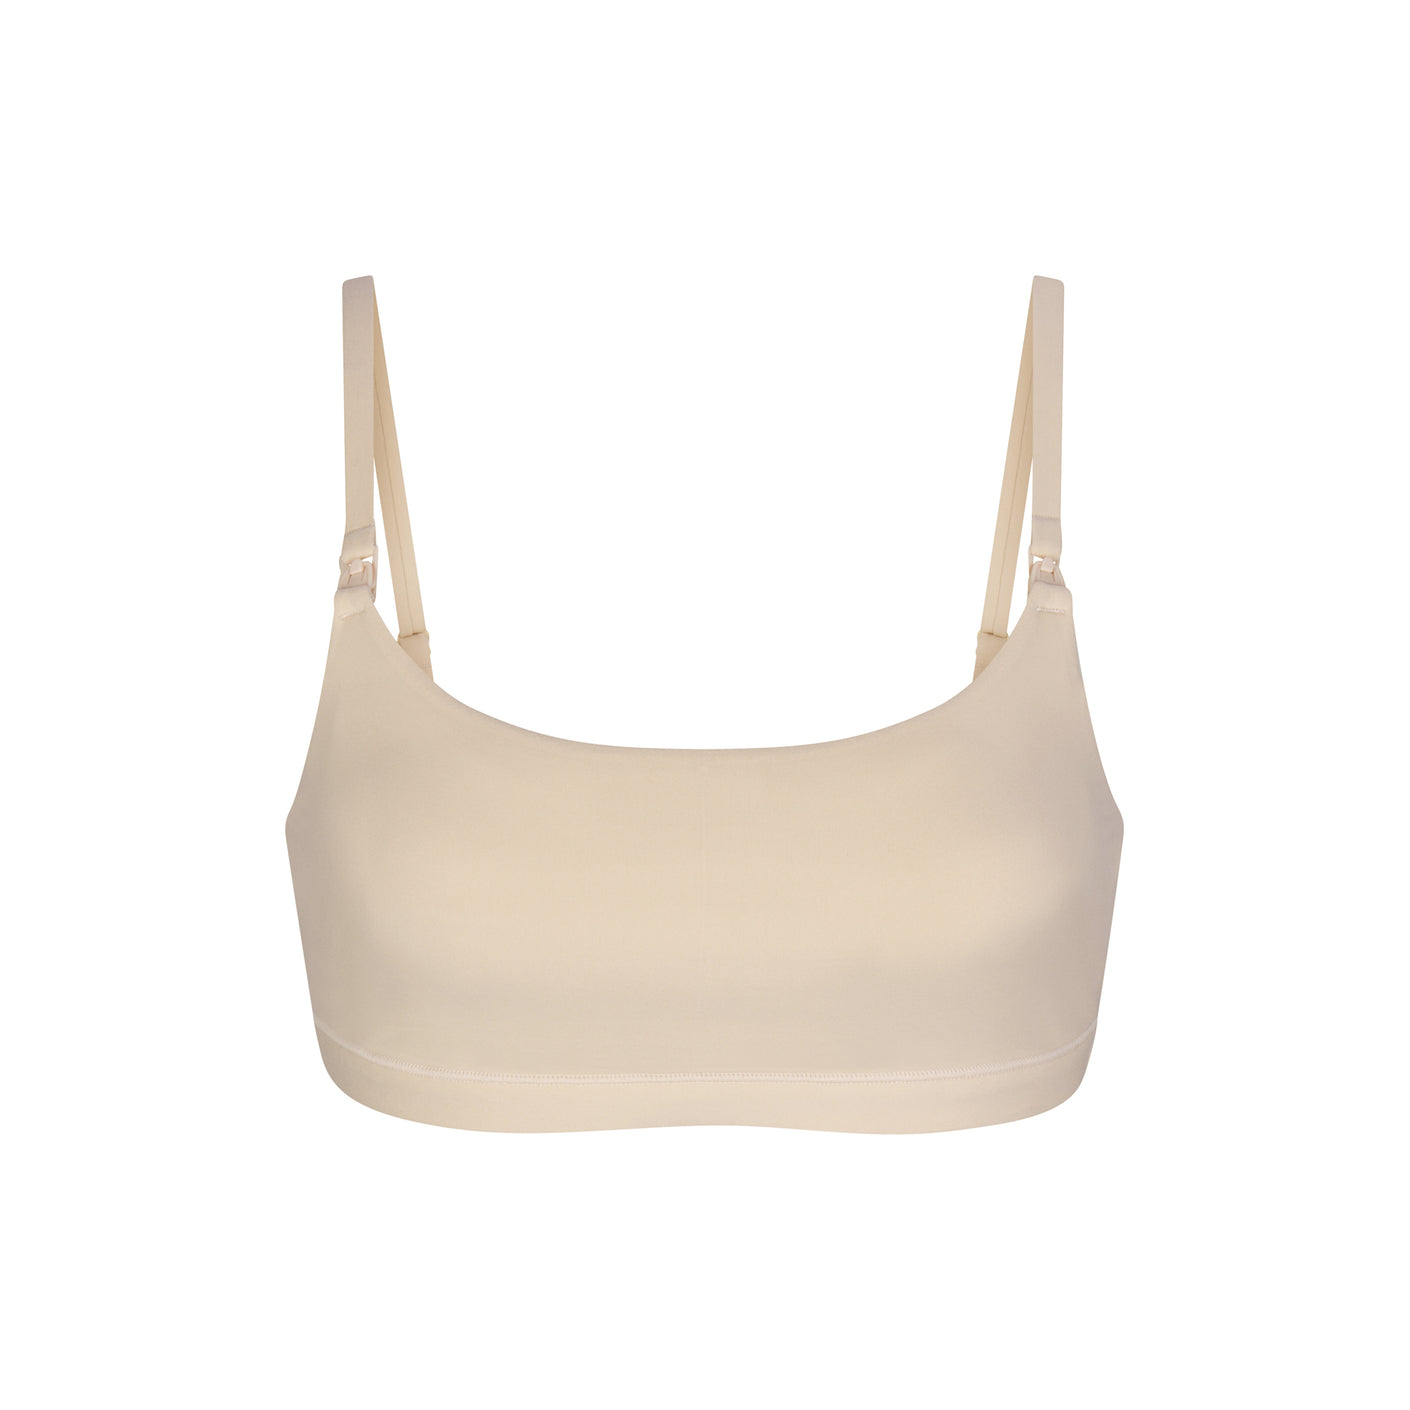 FITS EVERYBODY MATERNITY PUMPING SCOOP BRALETTE | SAND